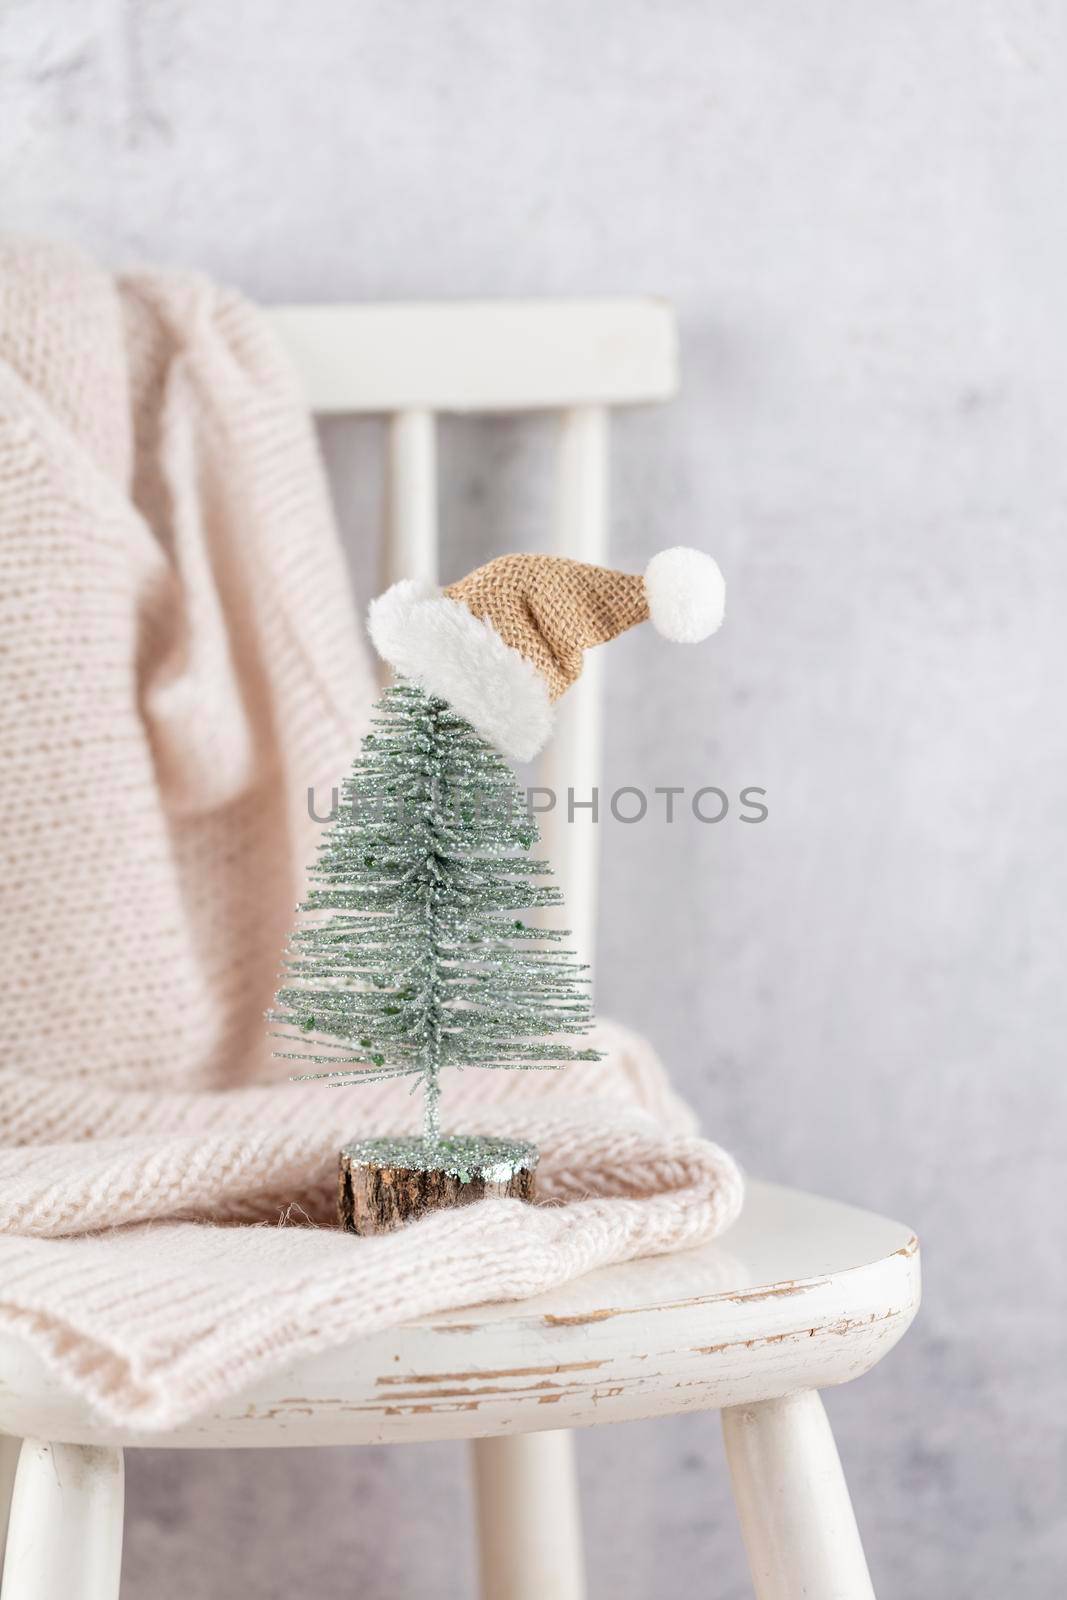 Cozy scandinavian family home on a Christmas eve. Xmas Concept, Decoration Over Grunge Background.